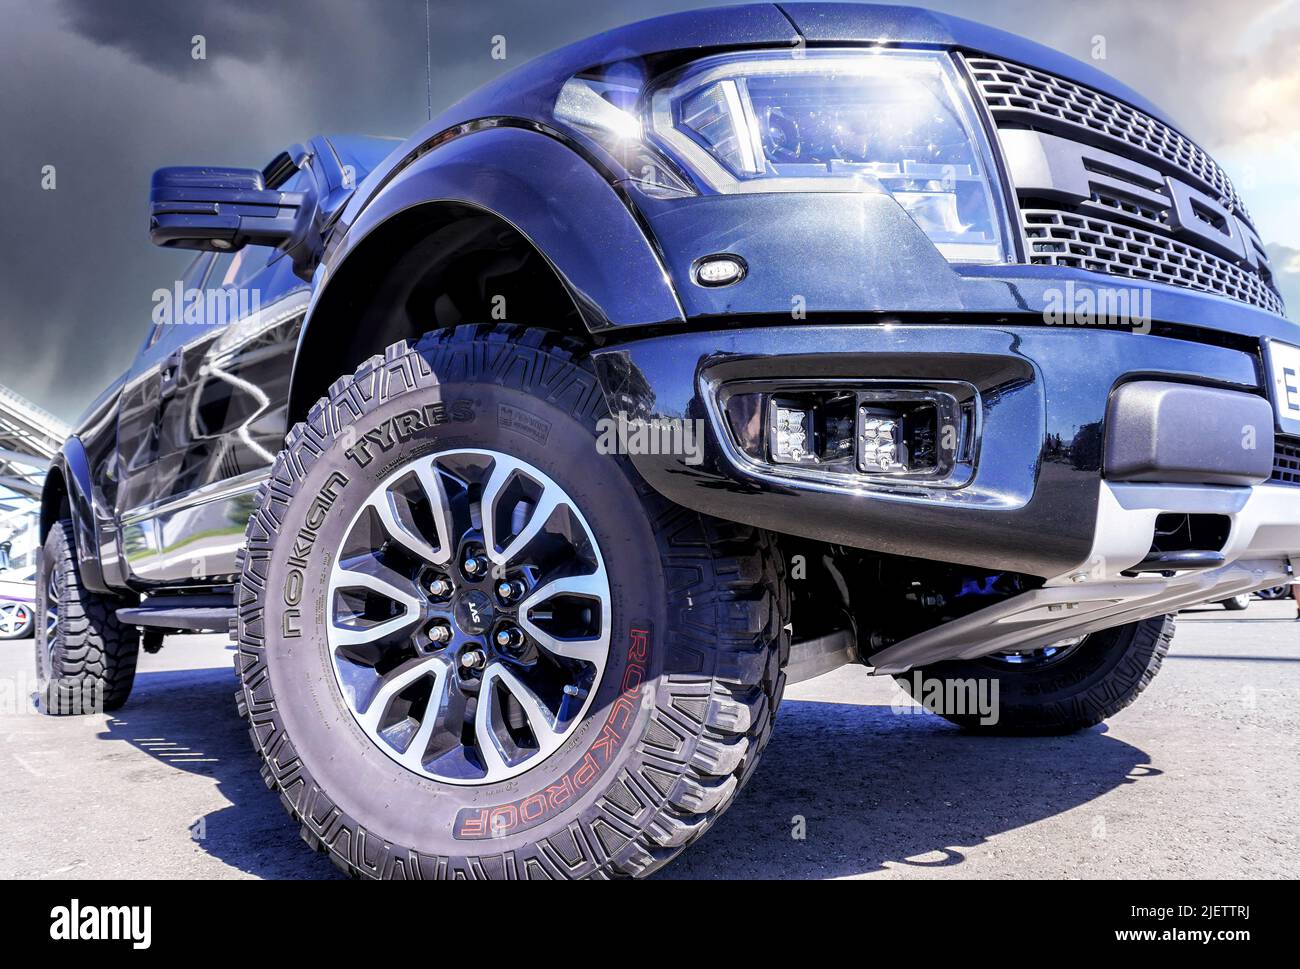 Samara, Russia - June 26, 2022: Off-road 4x4 Ford vehicle with all terrain tires Nokian Tyres. Black all terrain vehicle Ford 4x4 Stock Photo